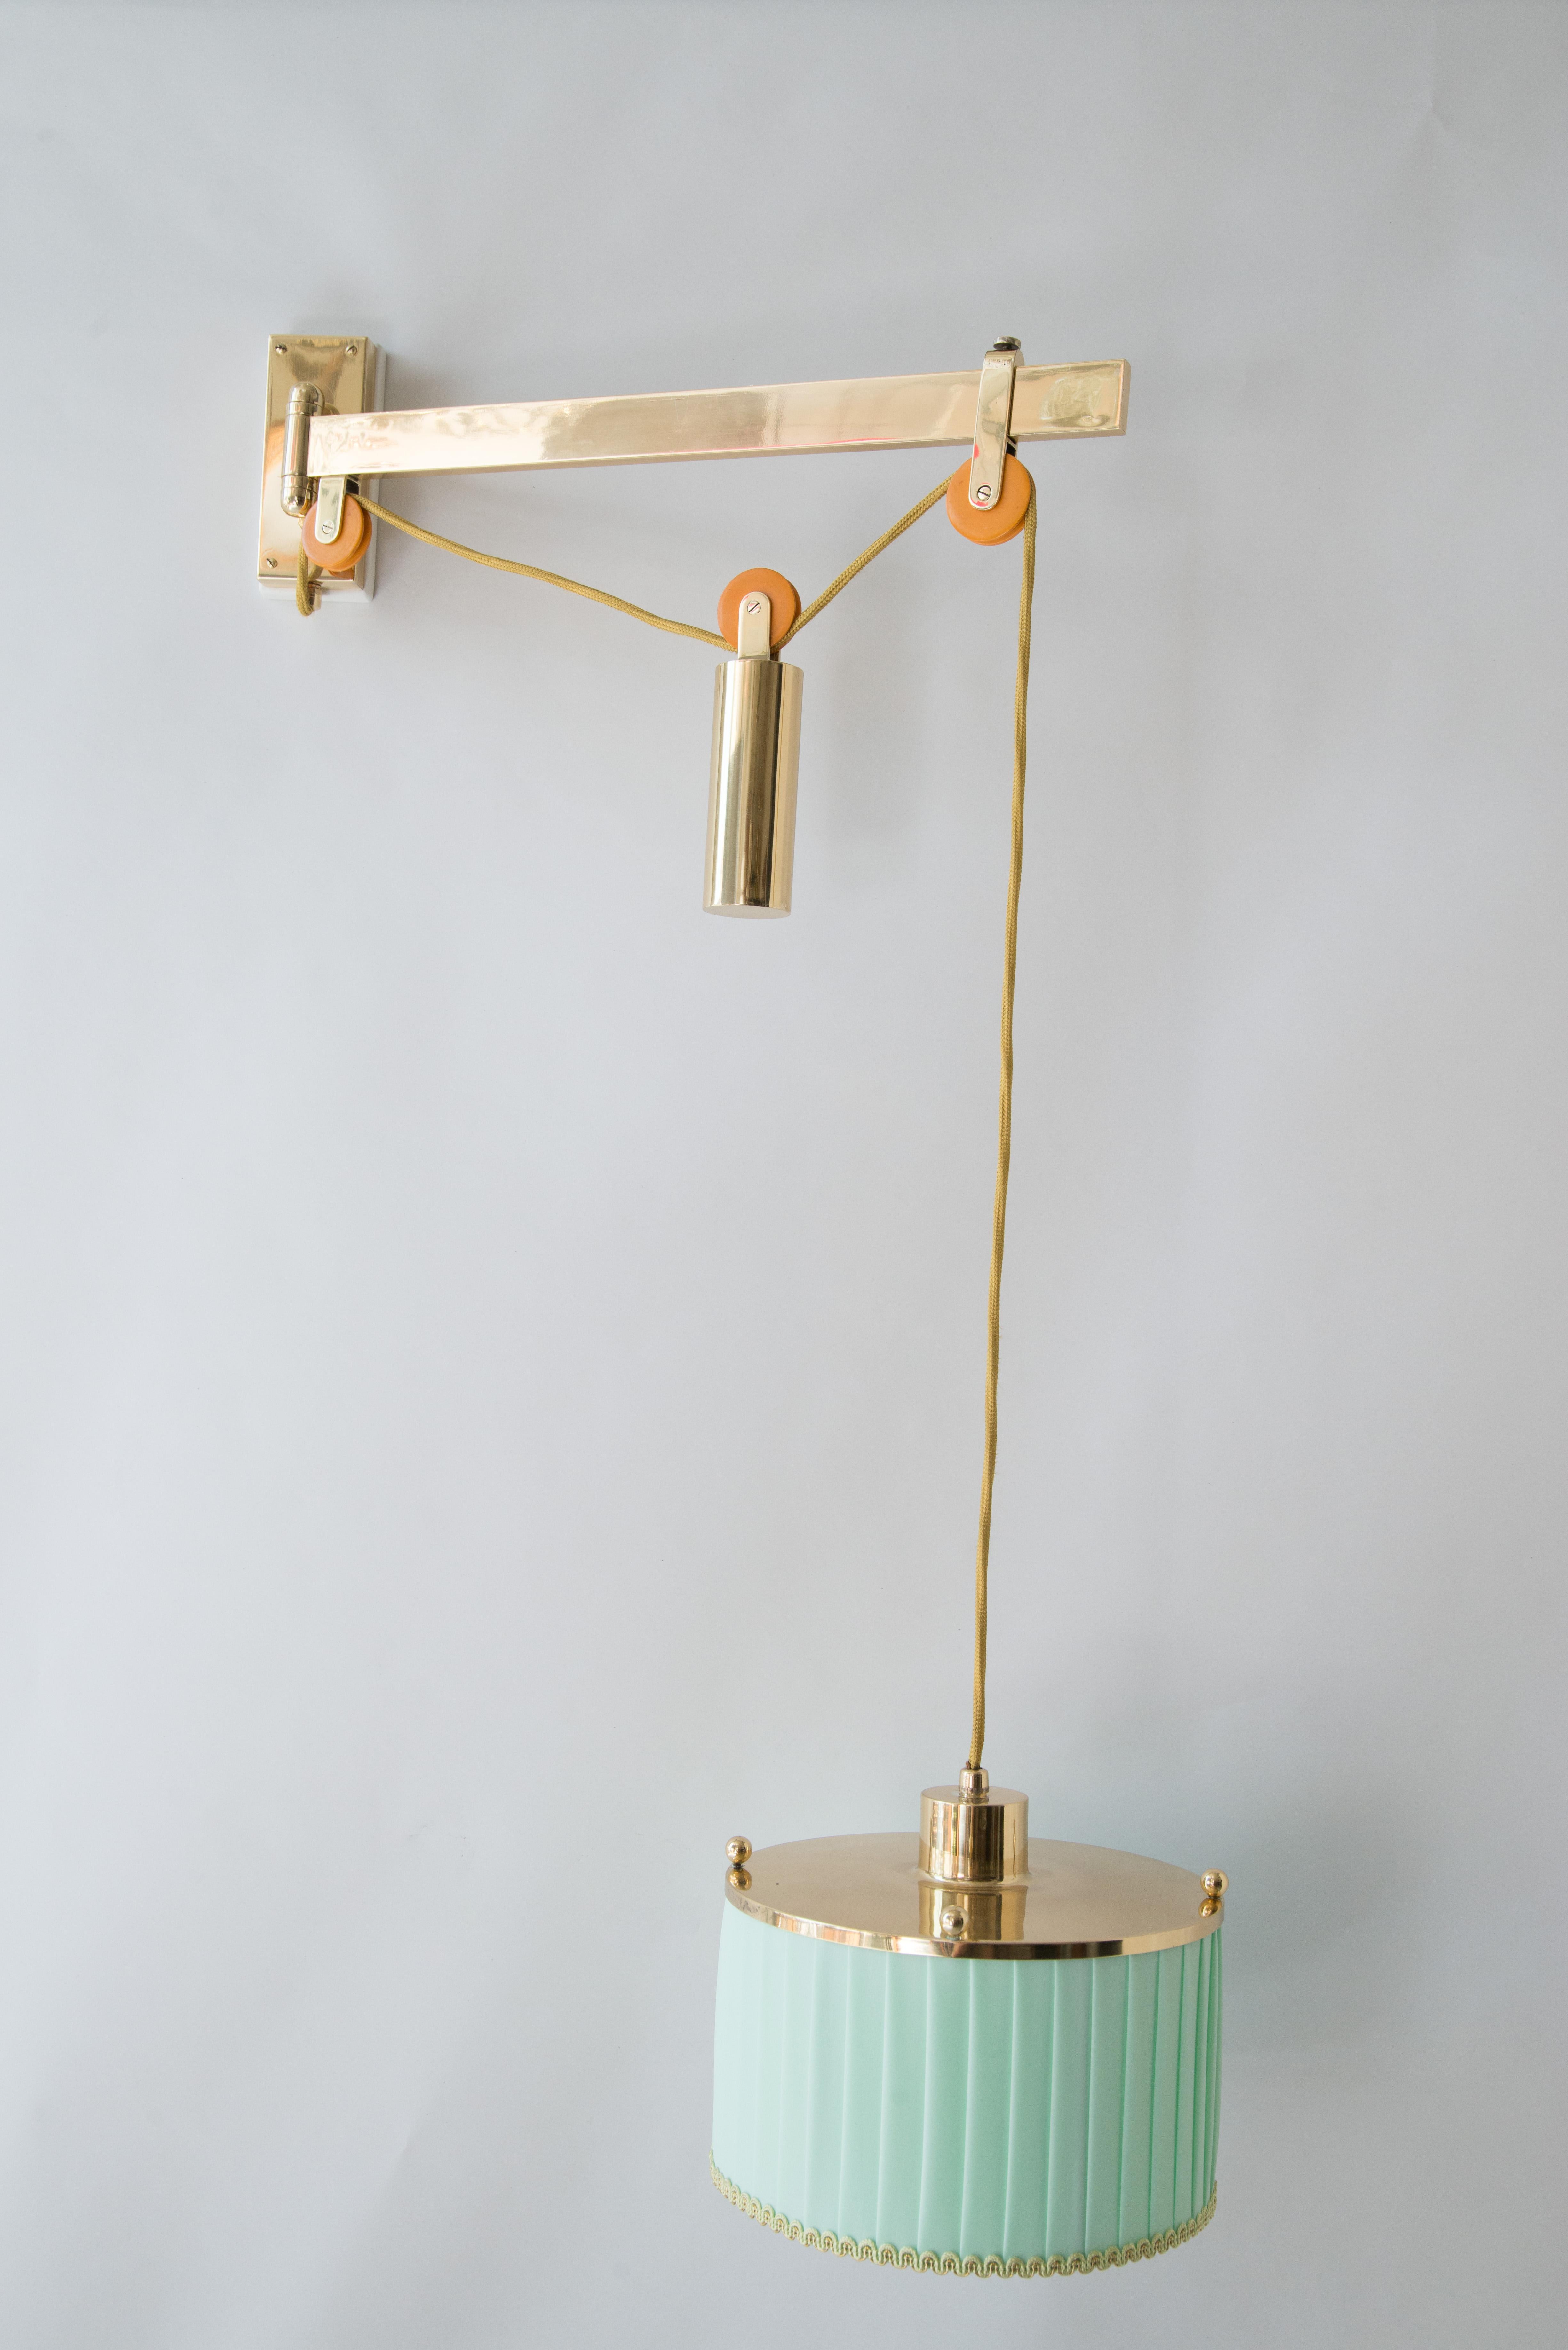 J.T. Kalmar adjustable wall lamp circa 1950s.
Polished brass 
Stove enameled 
Everything is original only the fabric and the wire is replaced.
The high is extendable from 58cm up to 87cm.